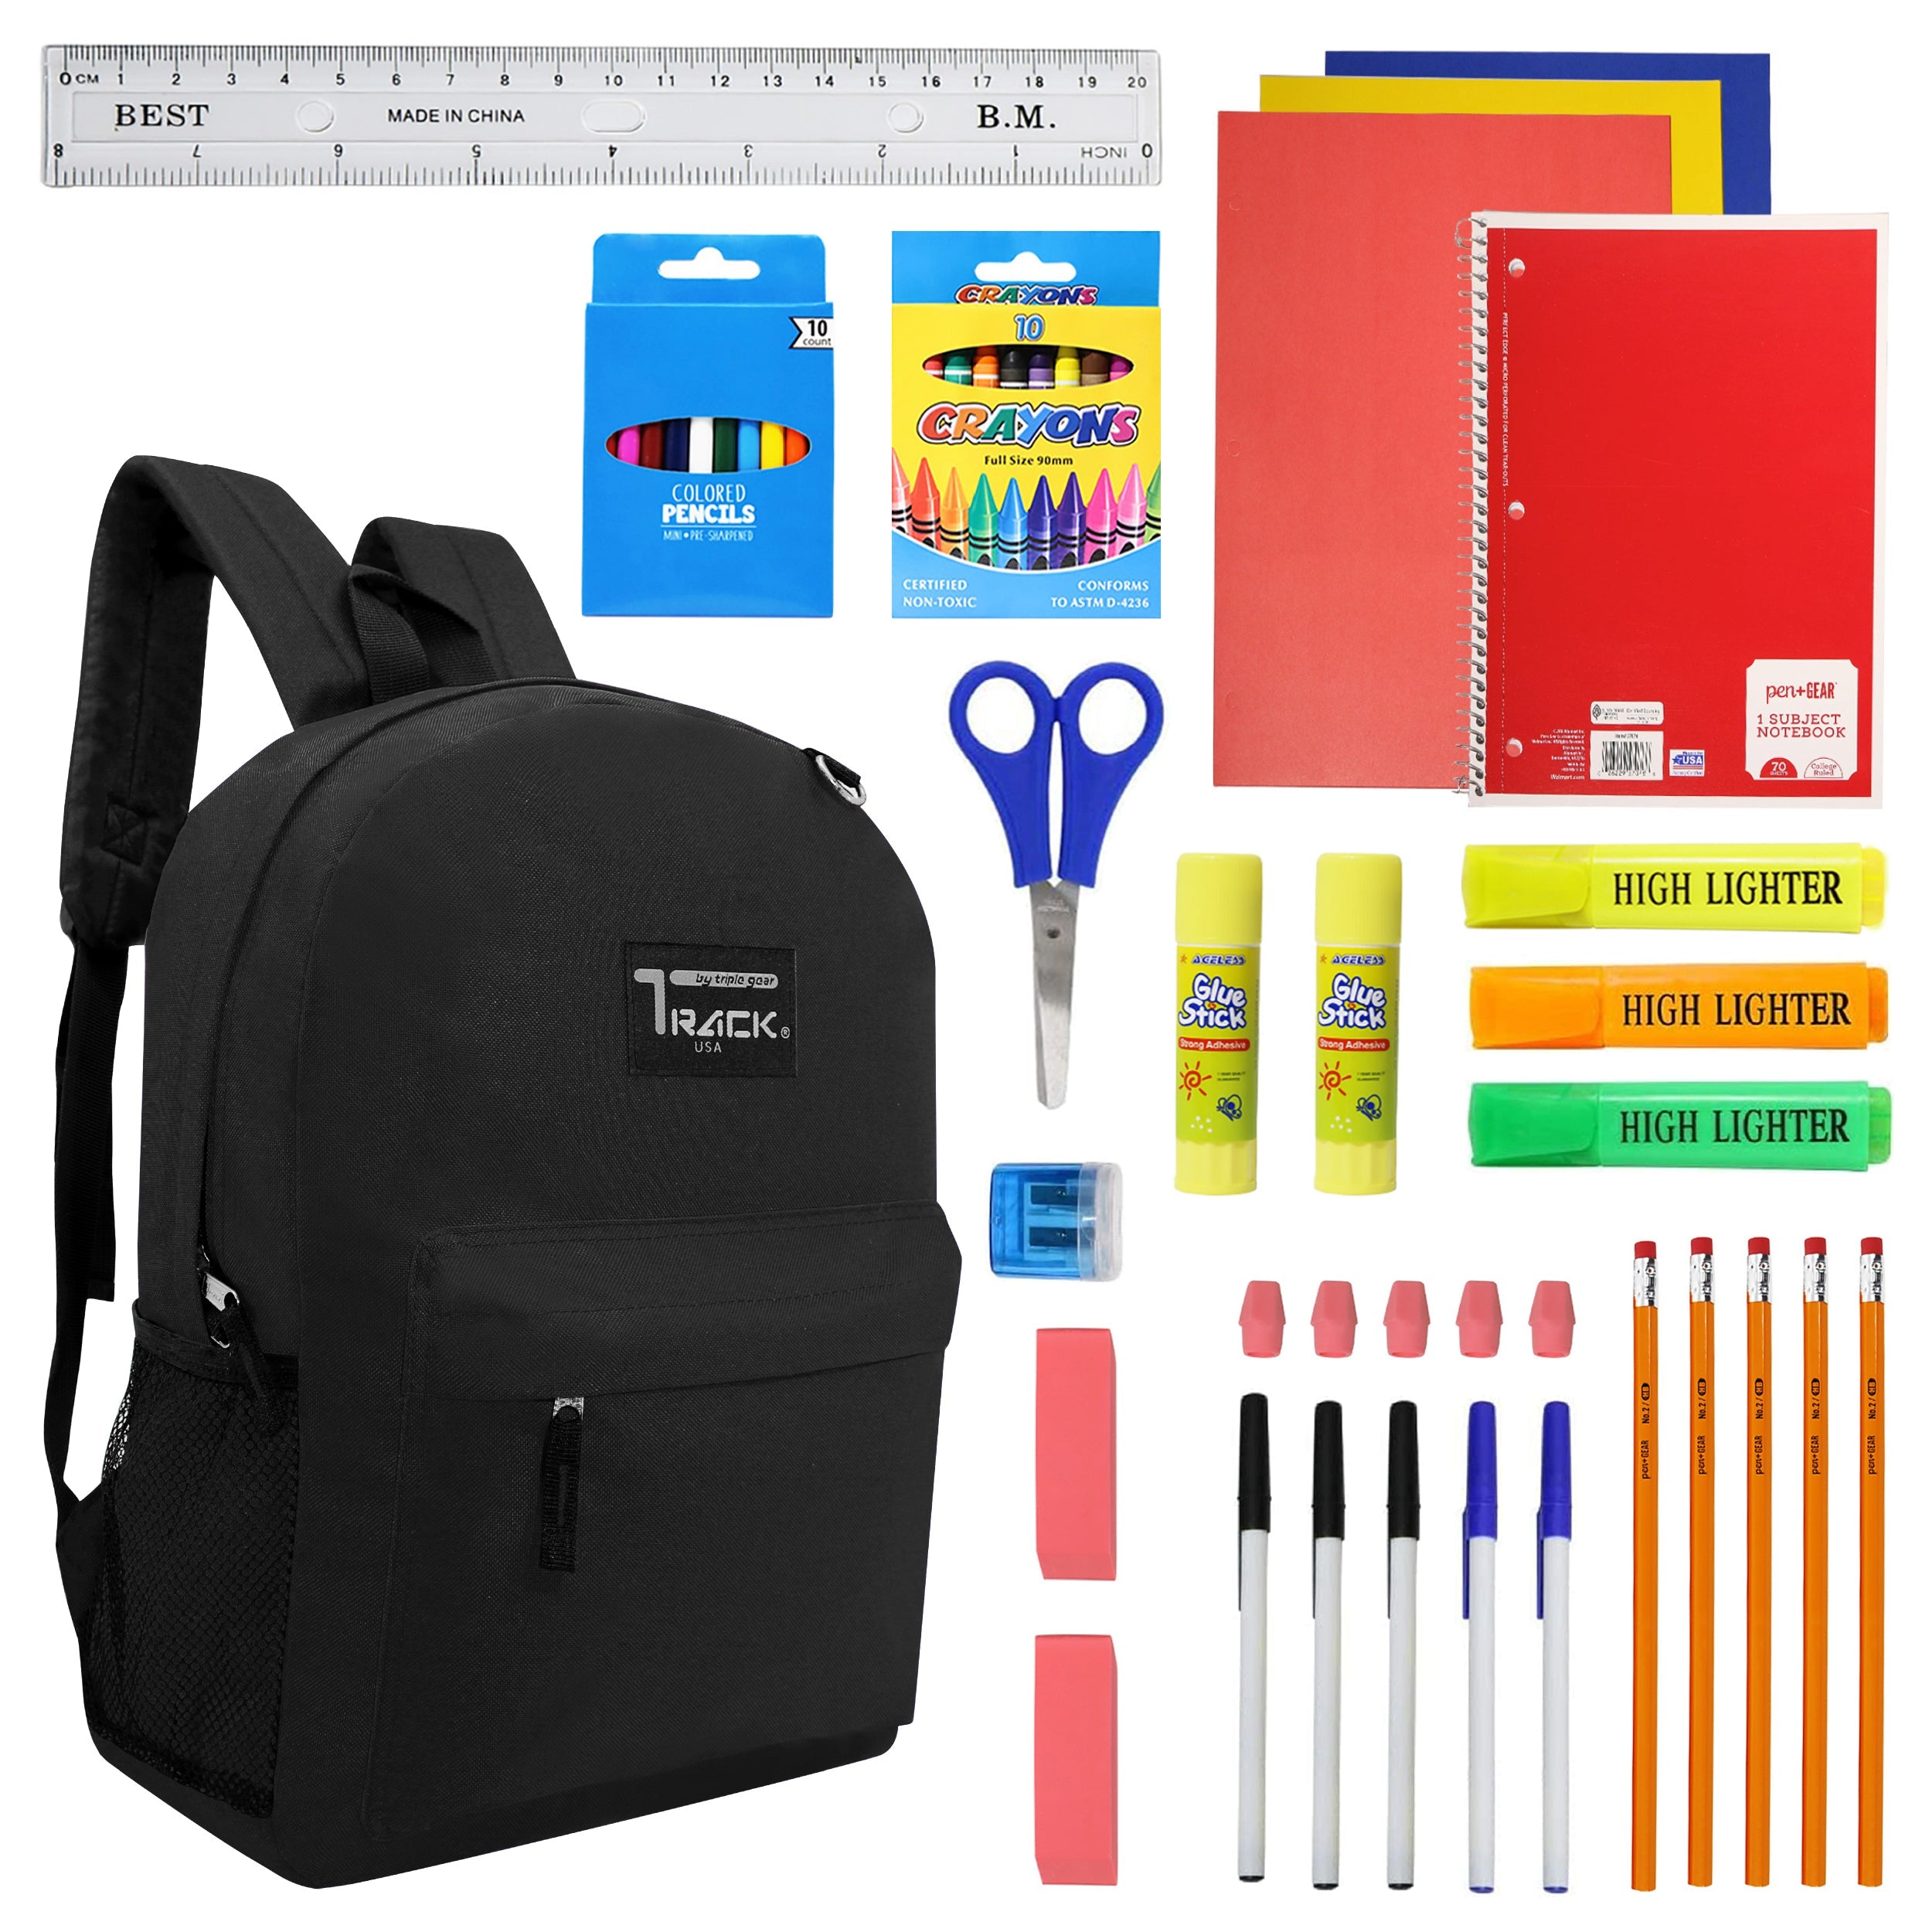 12 Black Wholesale Track Brand 17" Backpacks and 12 School Supply Kits of Your Choice